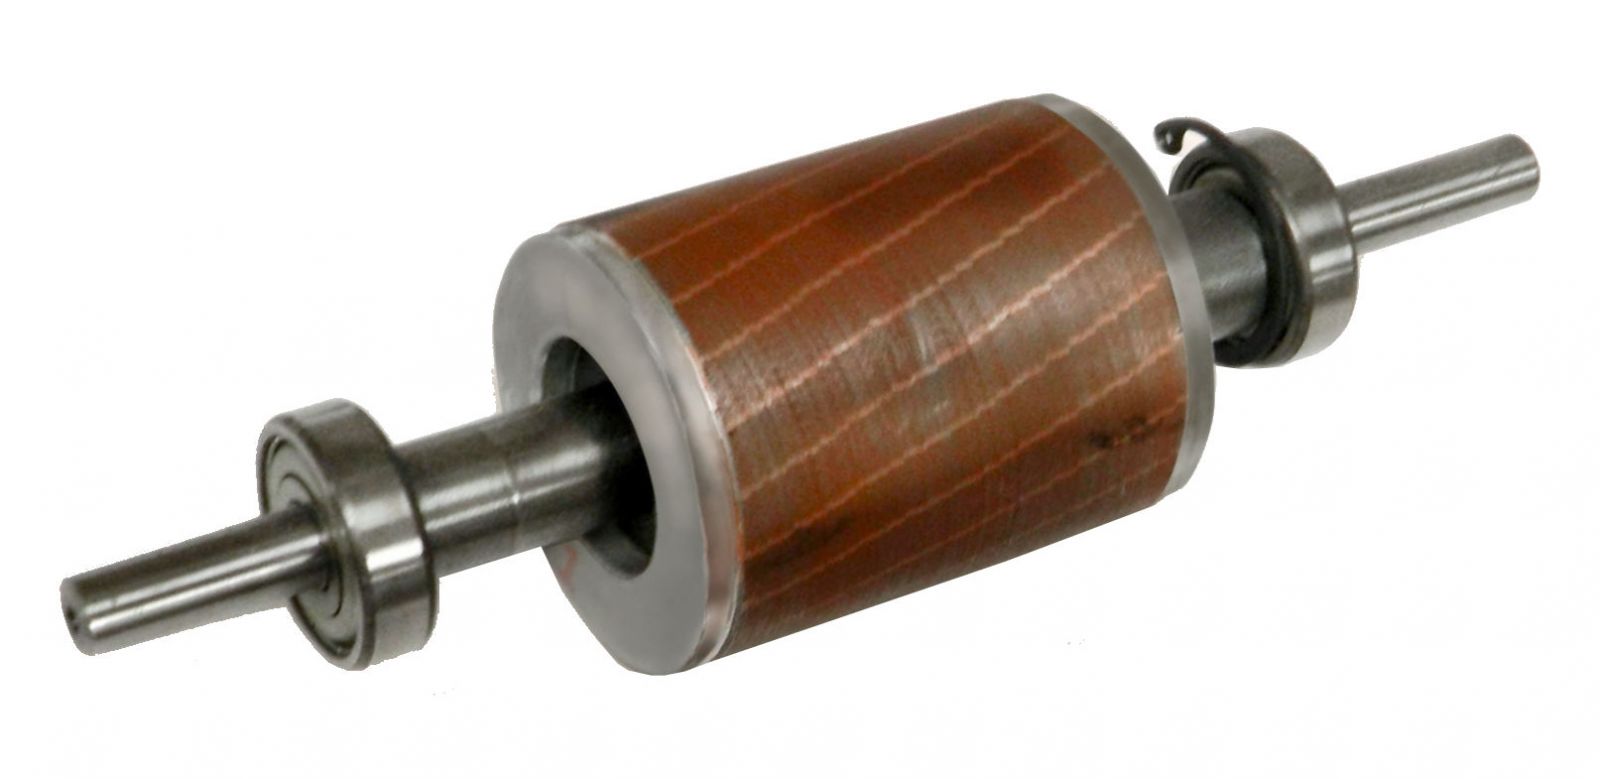 Bodine AC gearmotors and motors with a special "torque core" rotor for high starting torque